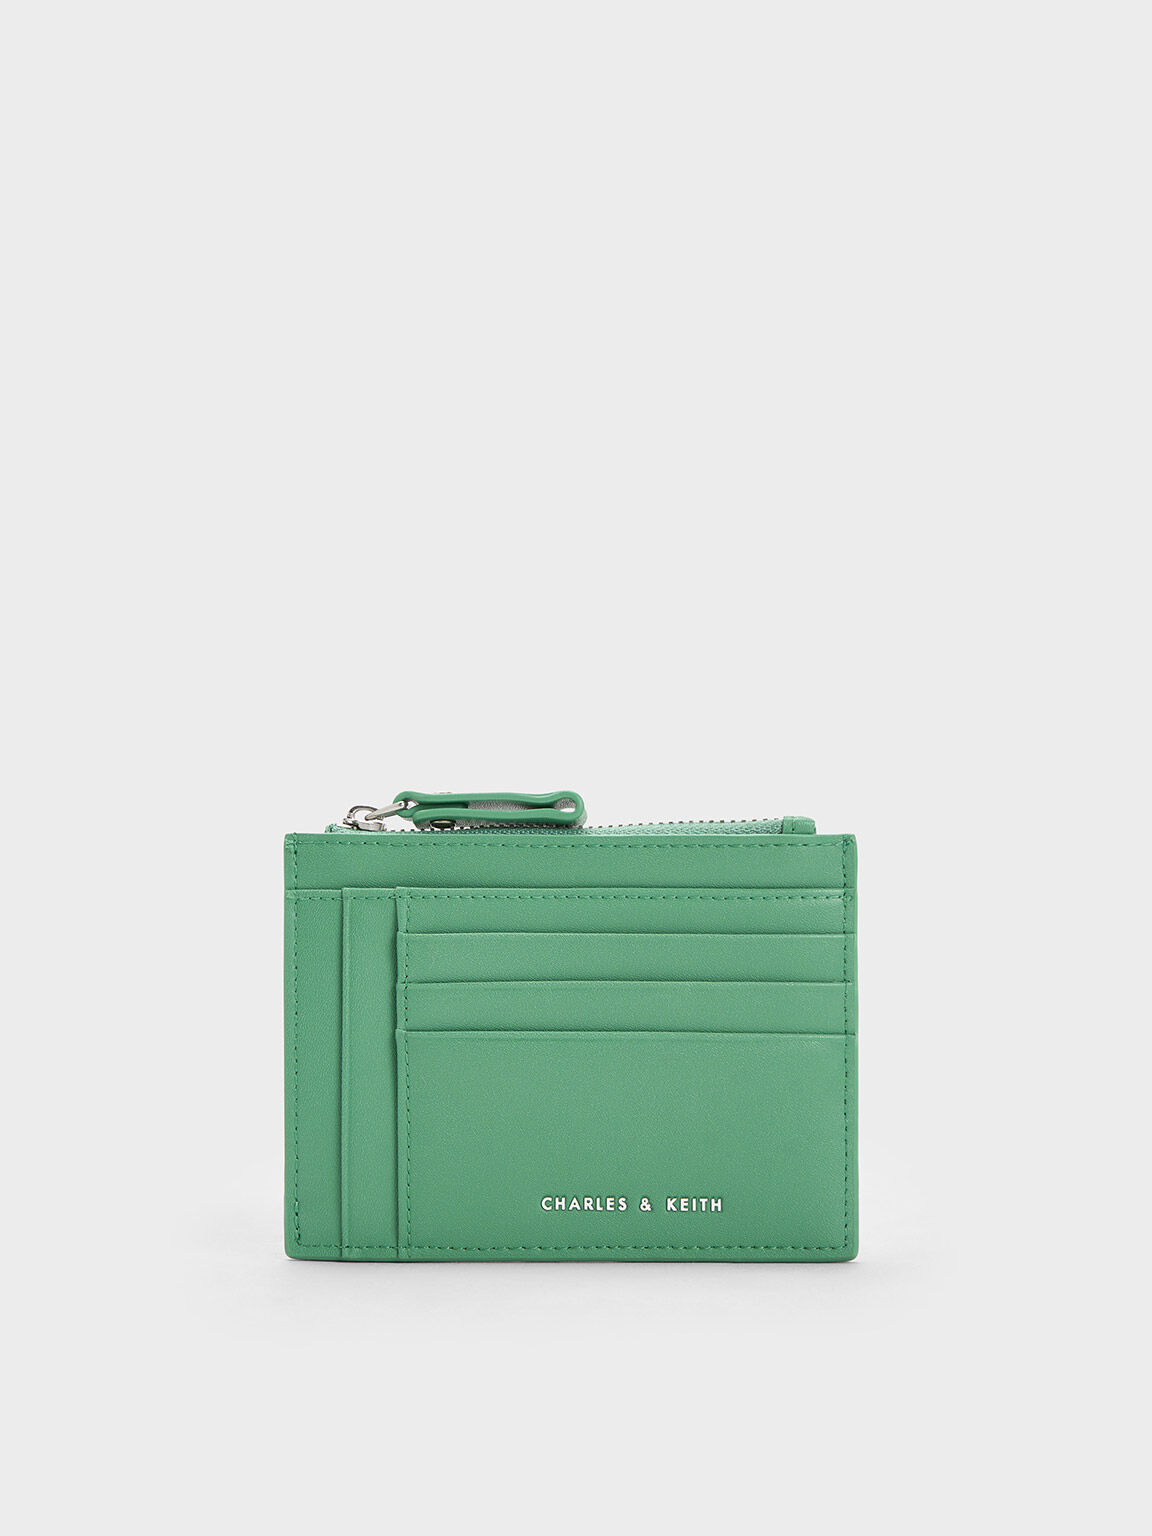 Charles & Keith Textured Mini Short Wallet in Green